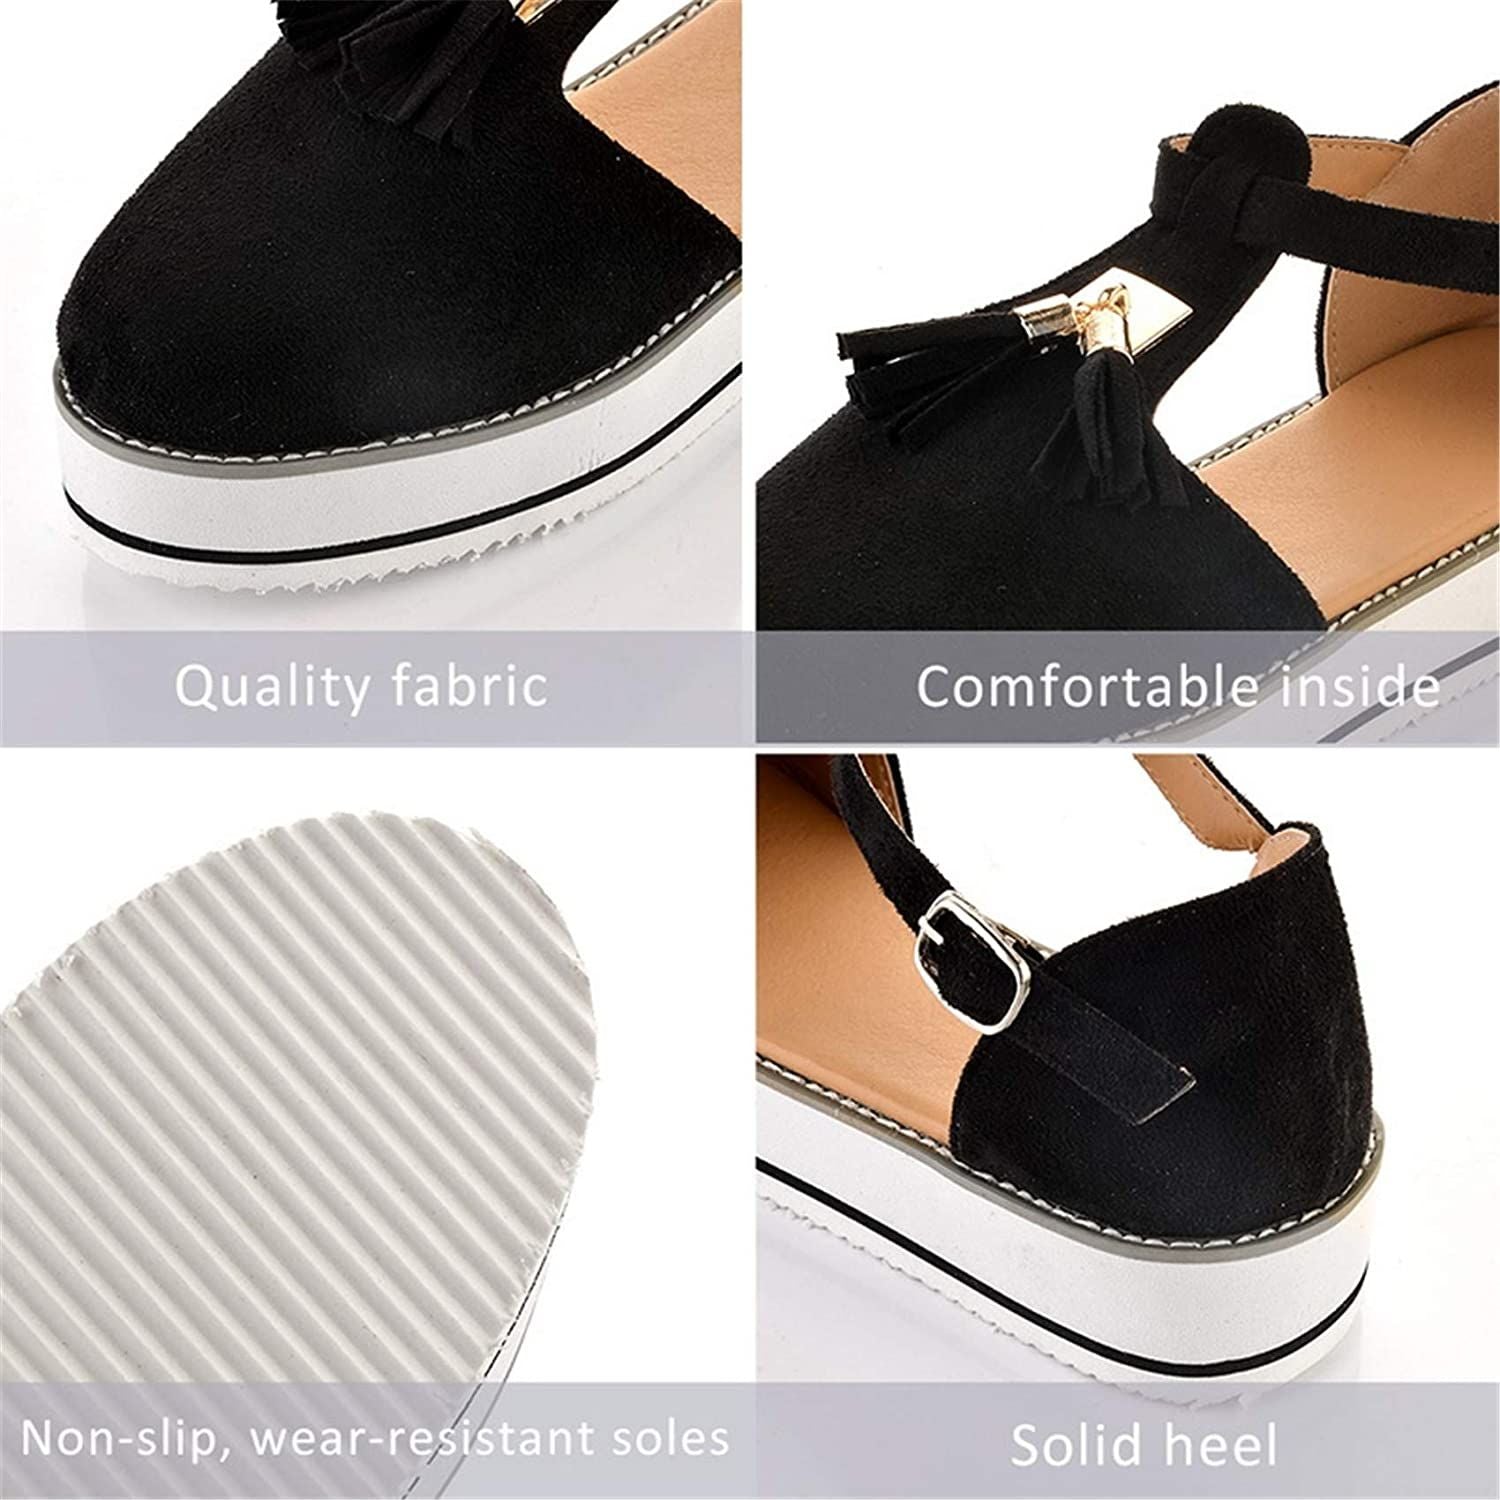 Women's Orthopedic Casual Platform Flat Comfort Shoes, Breathable Leather Walking Shoes High Damping Soles, 8 Unique Colors - Smiths Picks - Orthopedic Shoes & Sandals